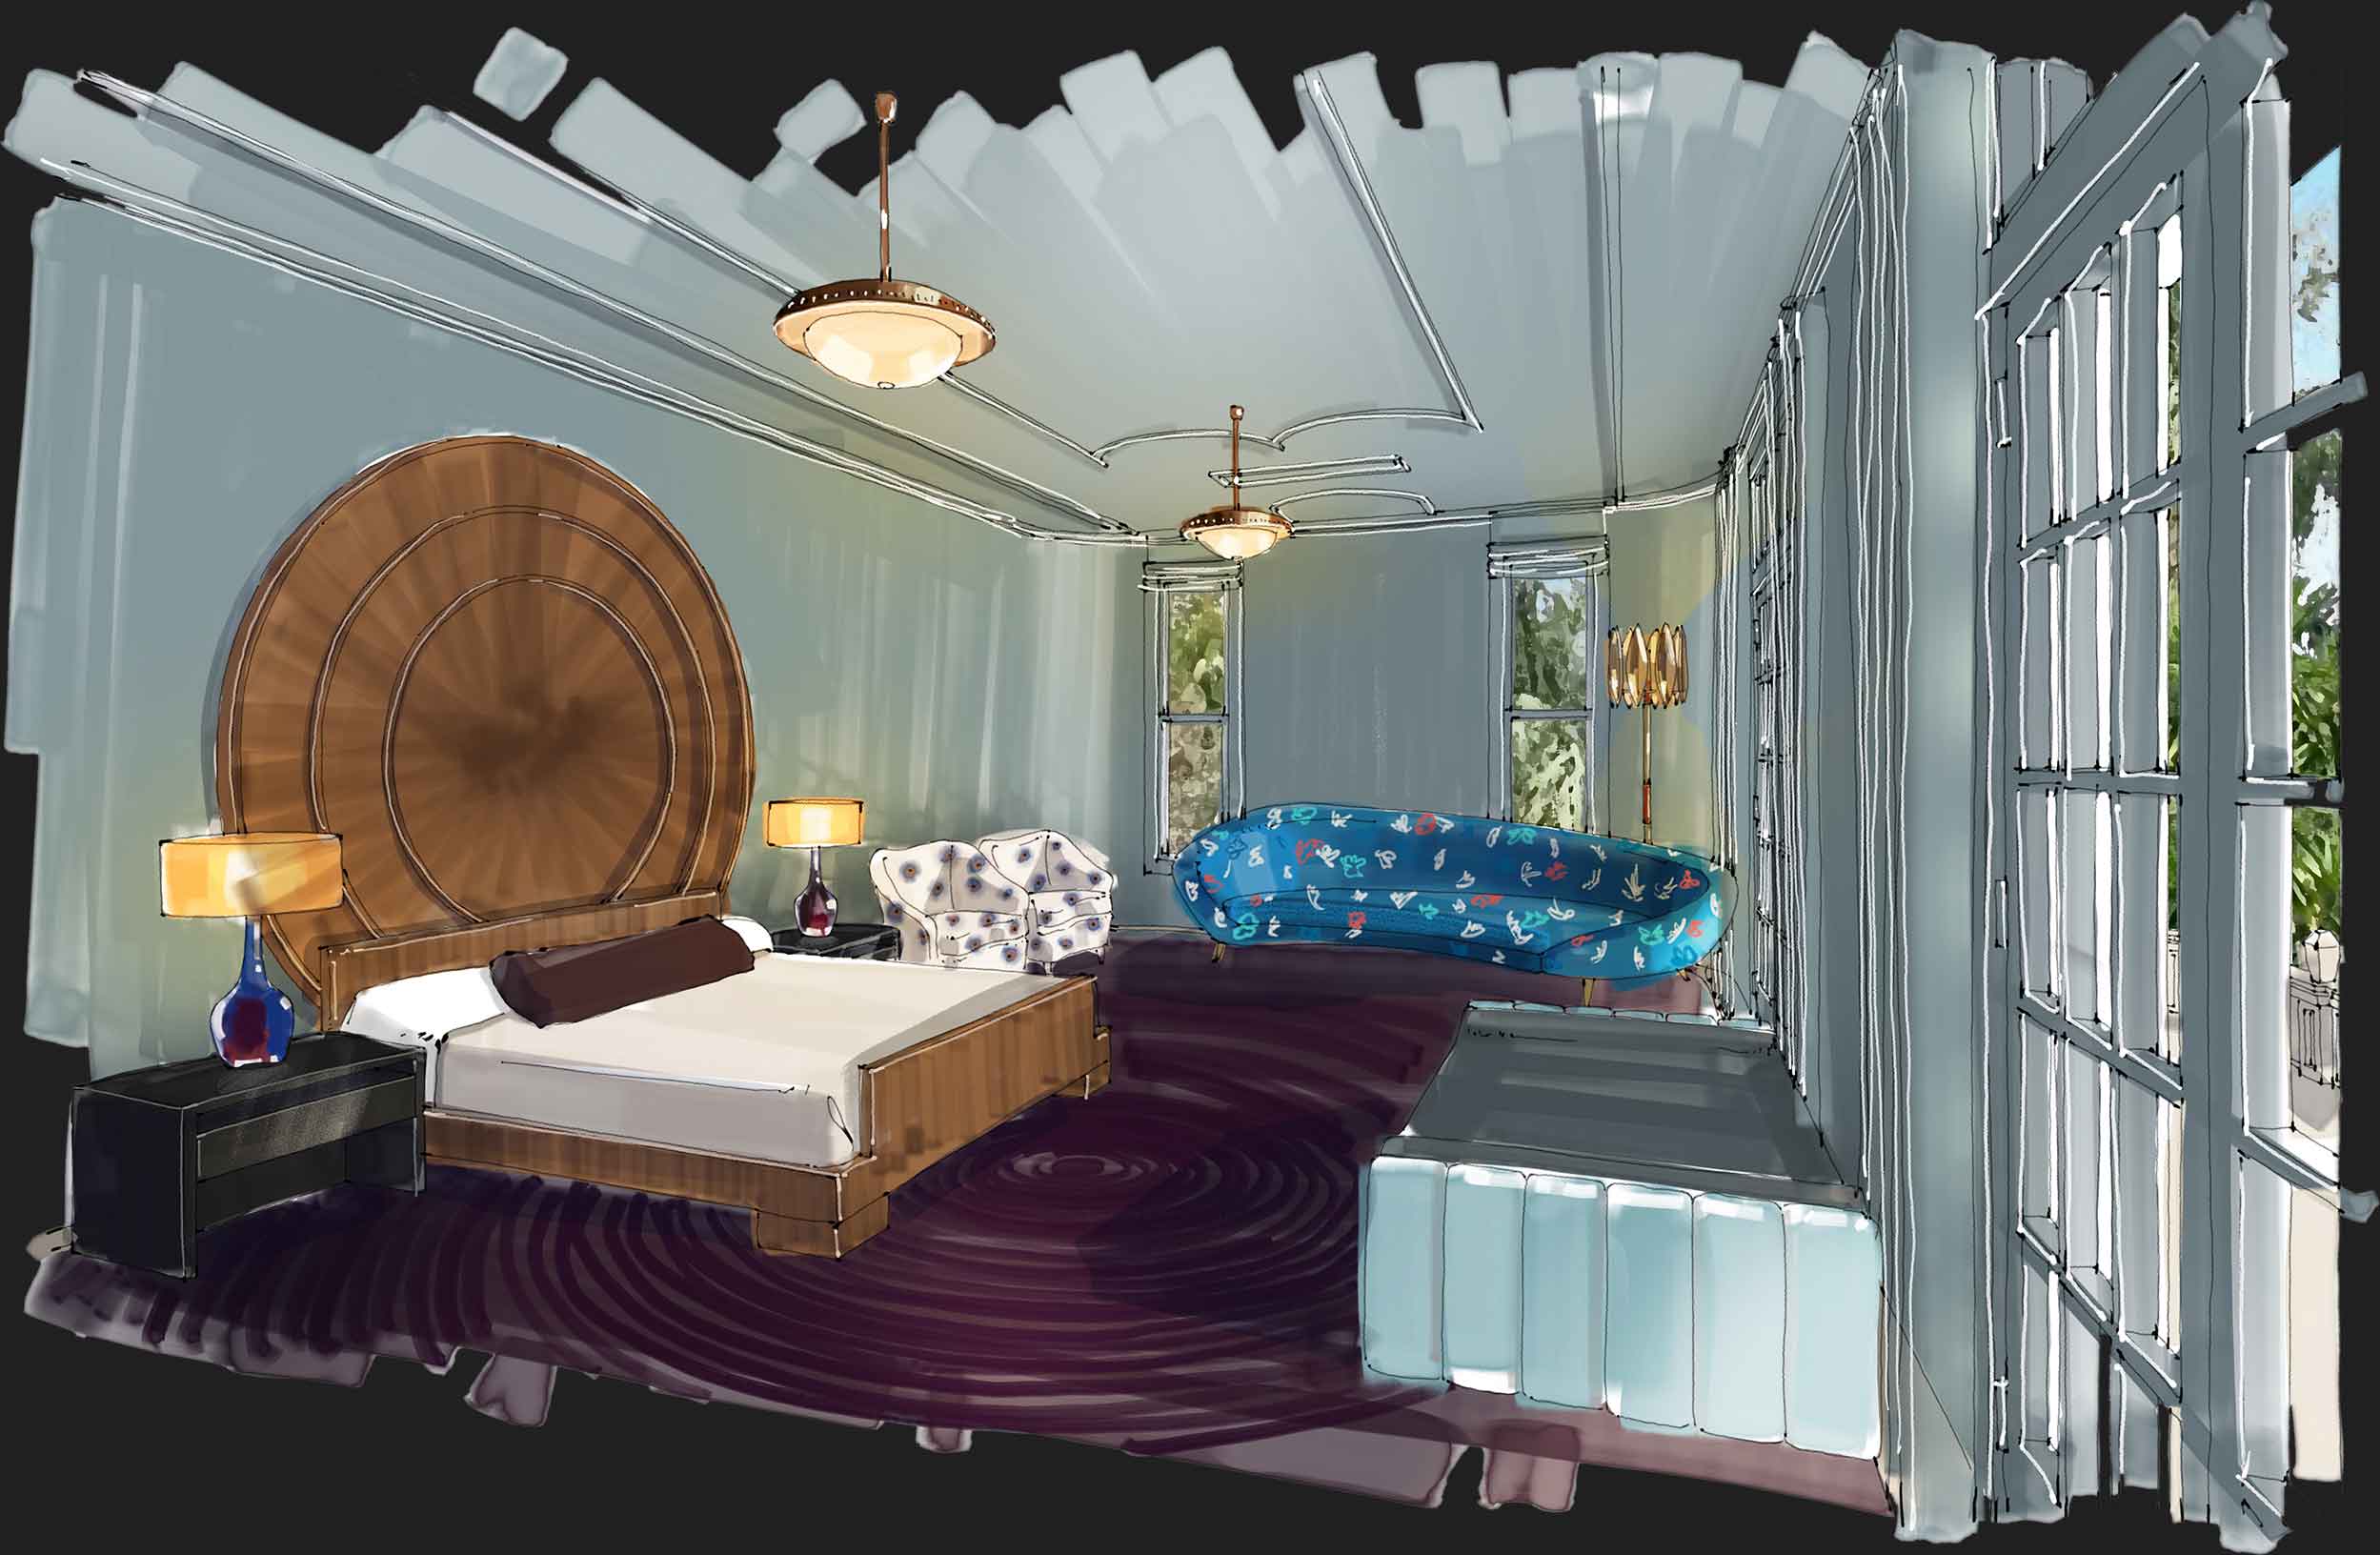 Colorful hand-drawn rendering of bedroom